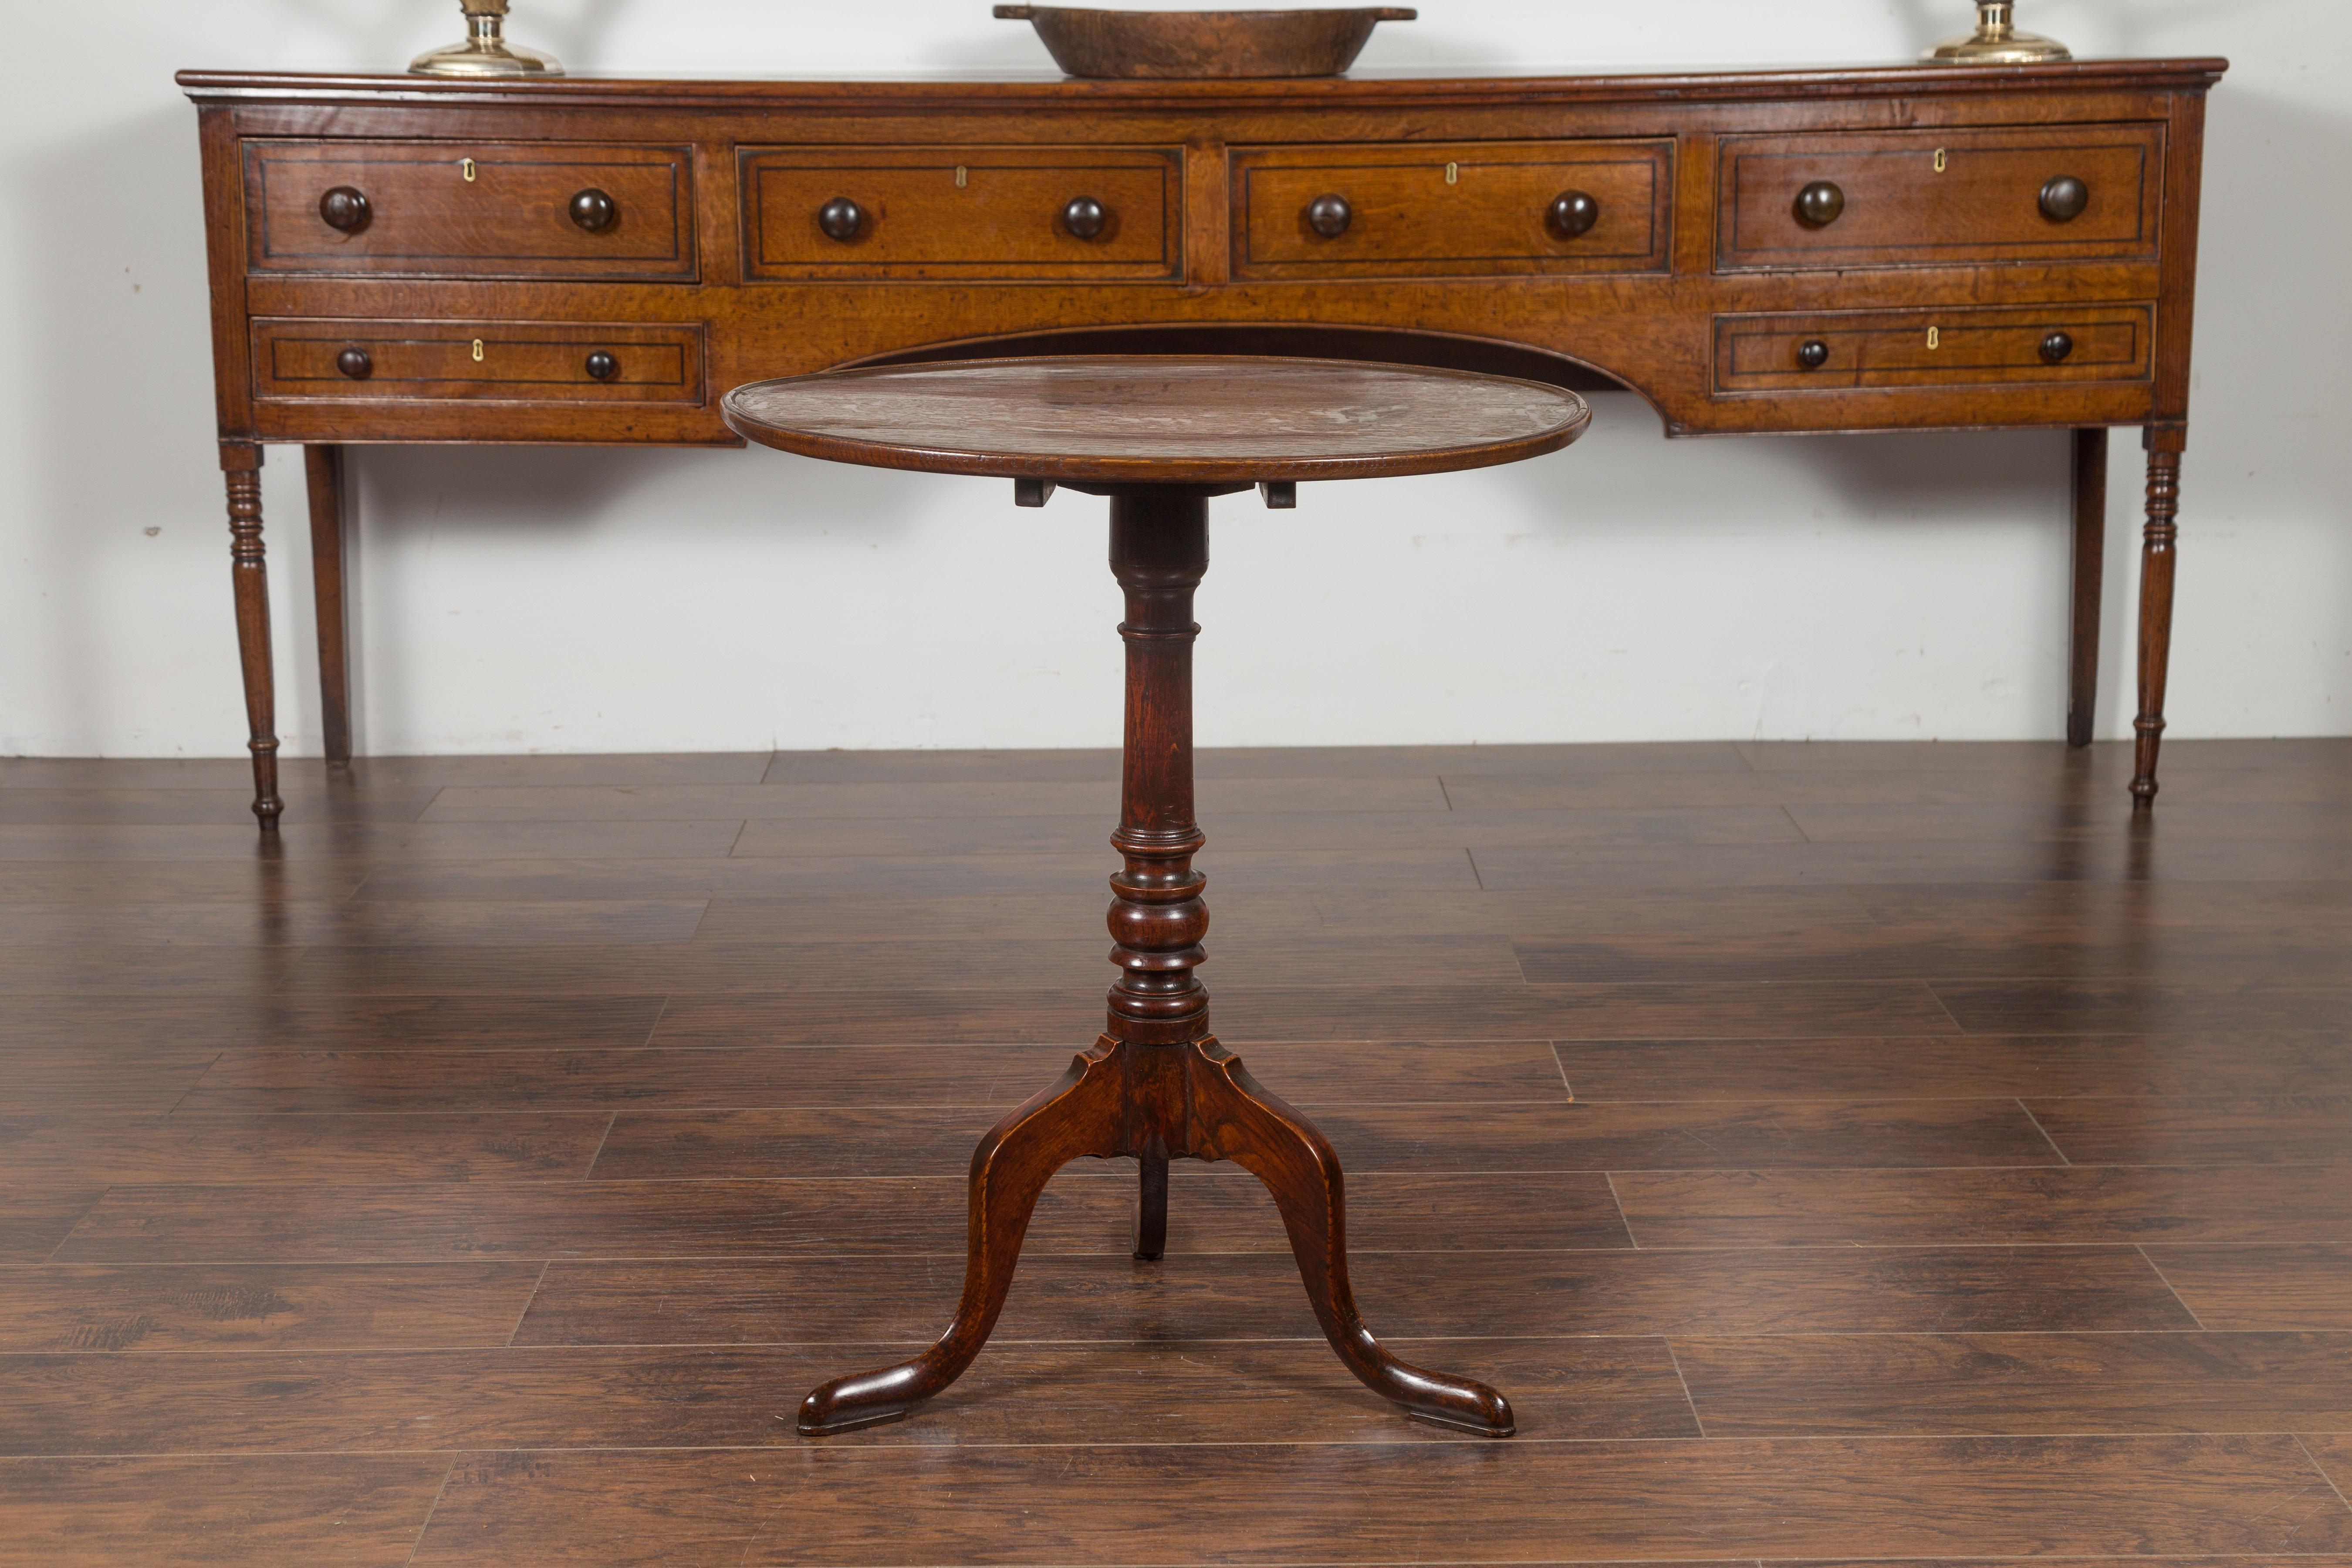 An English tilt-top oak gueridon table from the late 19th century, with tripod base. Created in England during the this quarter of the 19th century, this oak table features a circular tilt-top sitting above a pedestal resting on a tripod base.